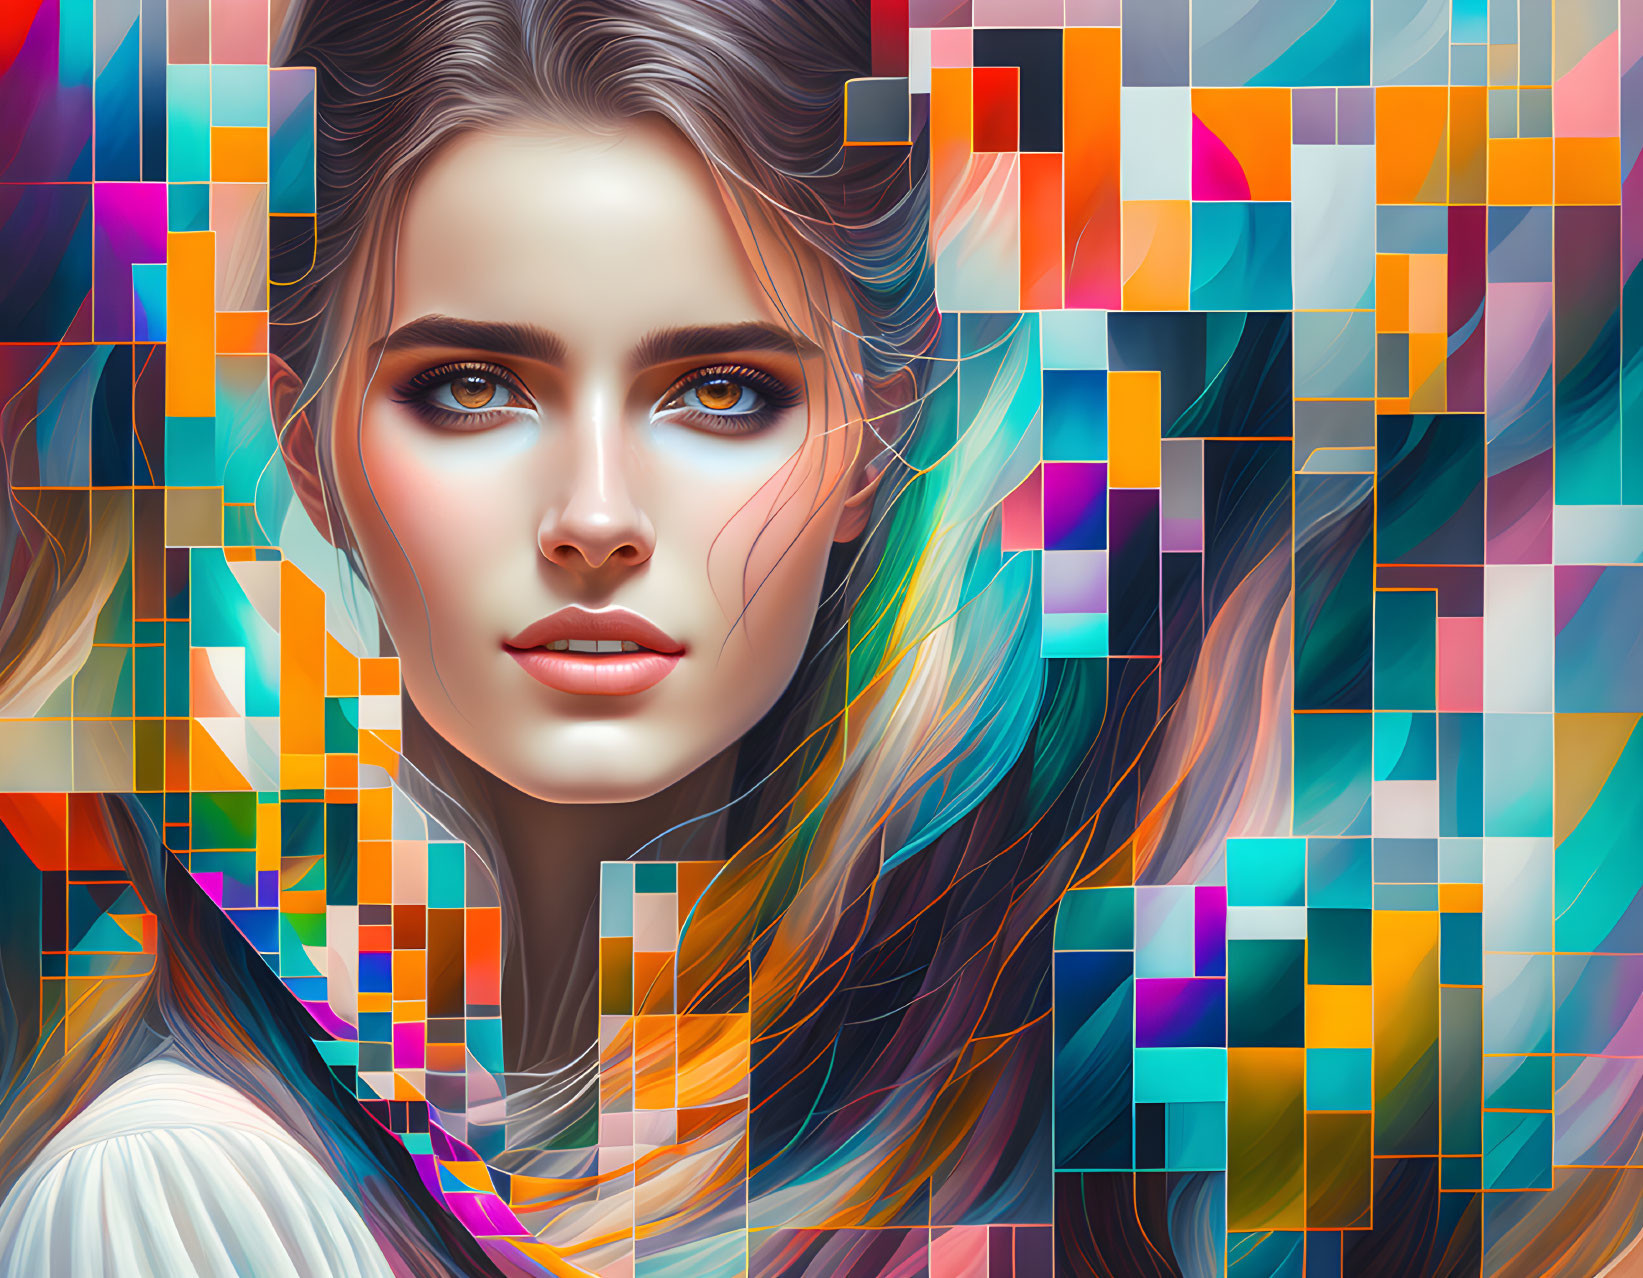 Thoughtful girl in multicolor grid